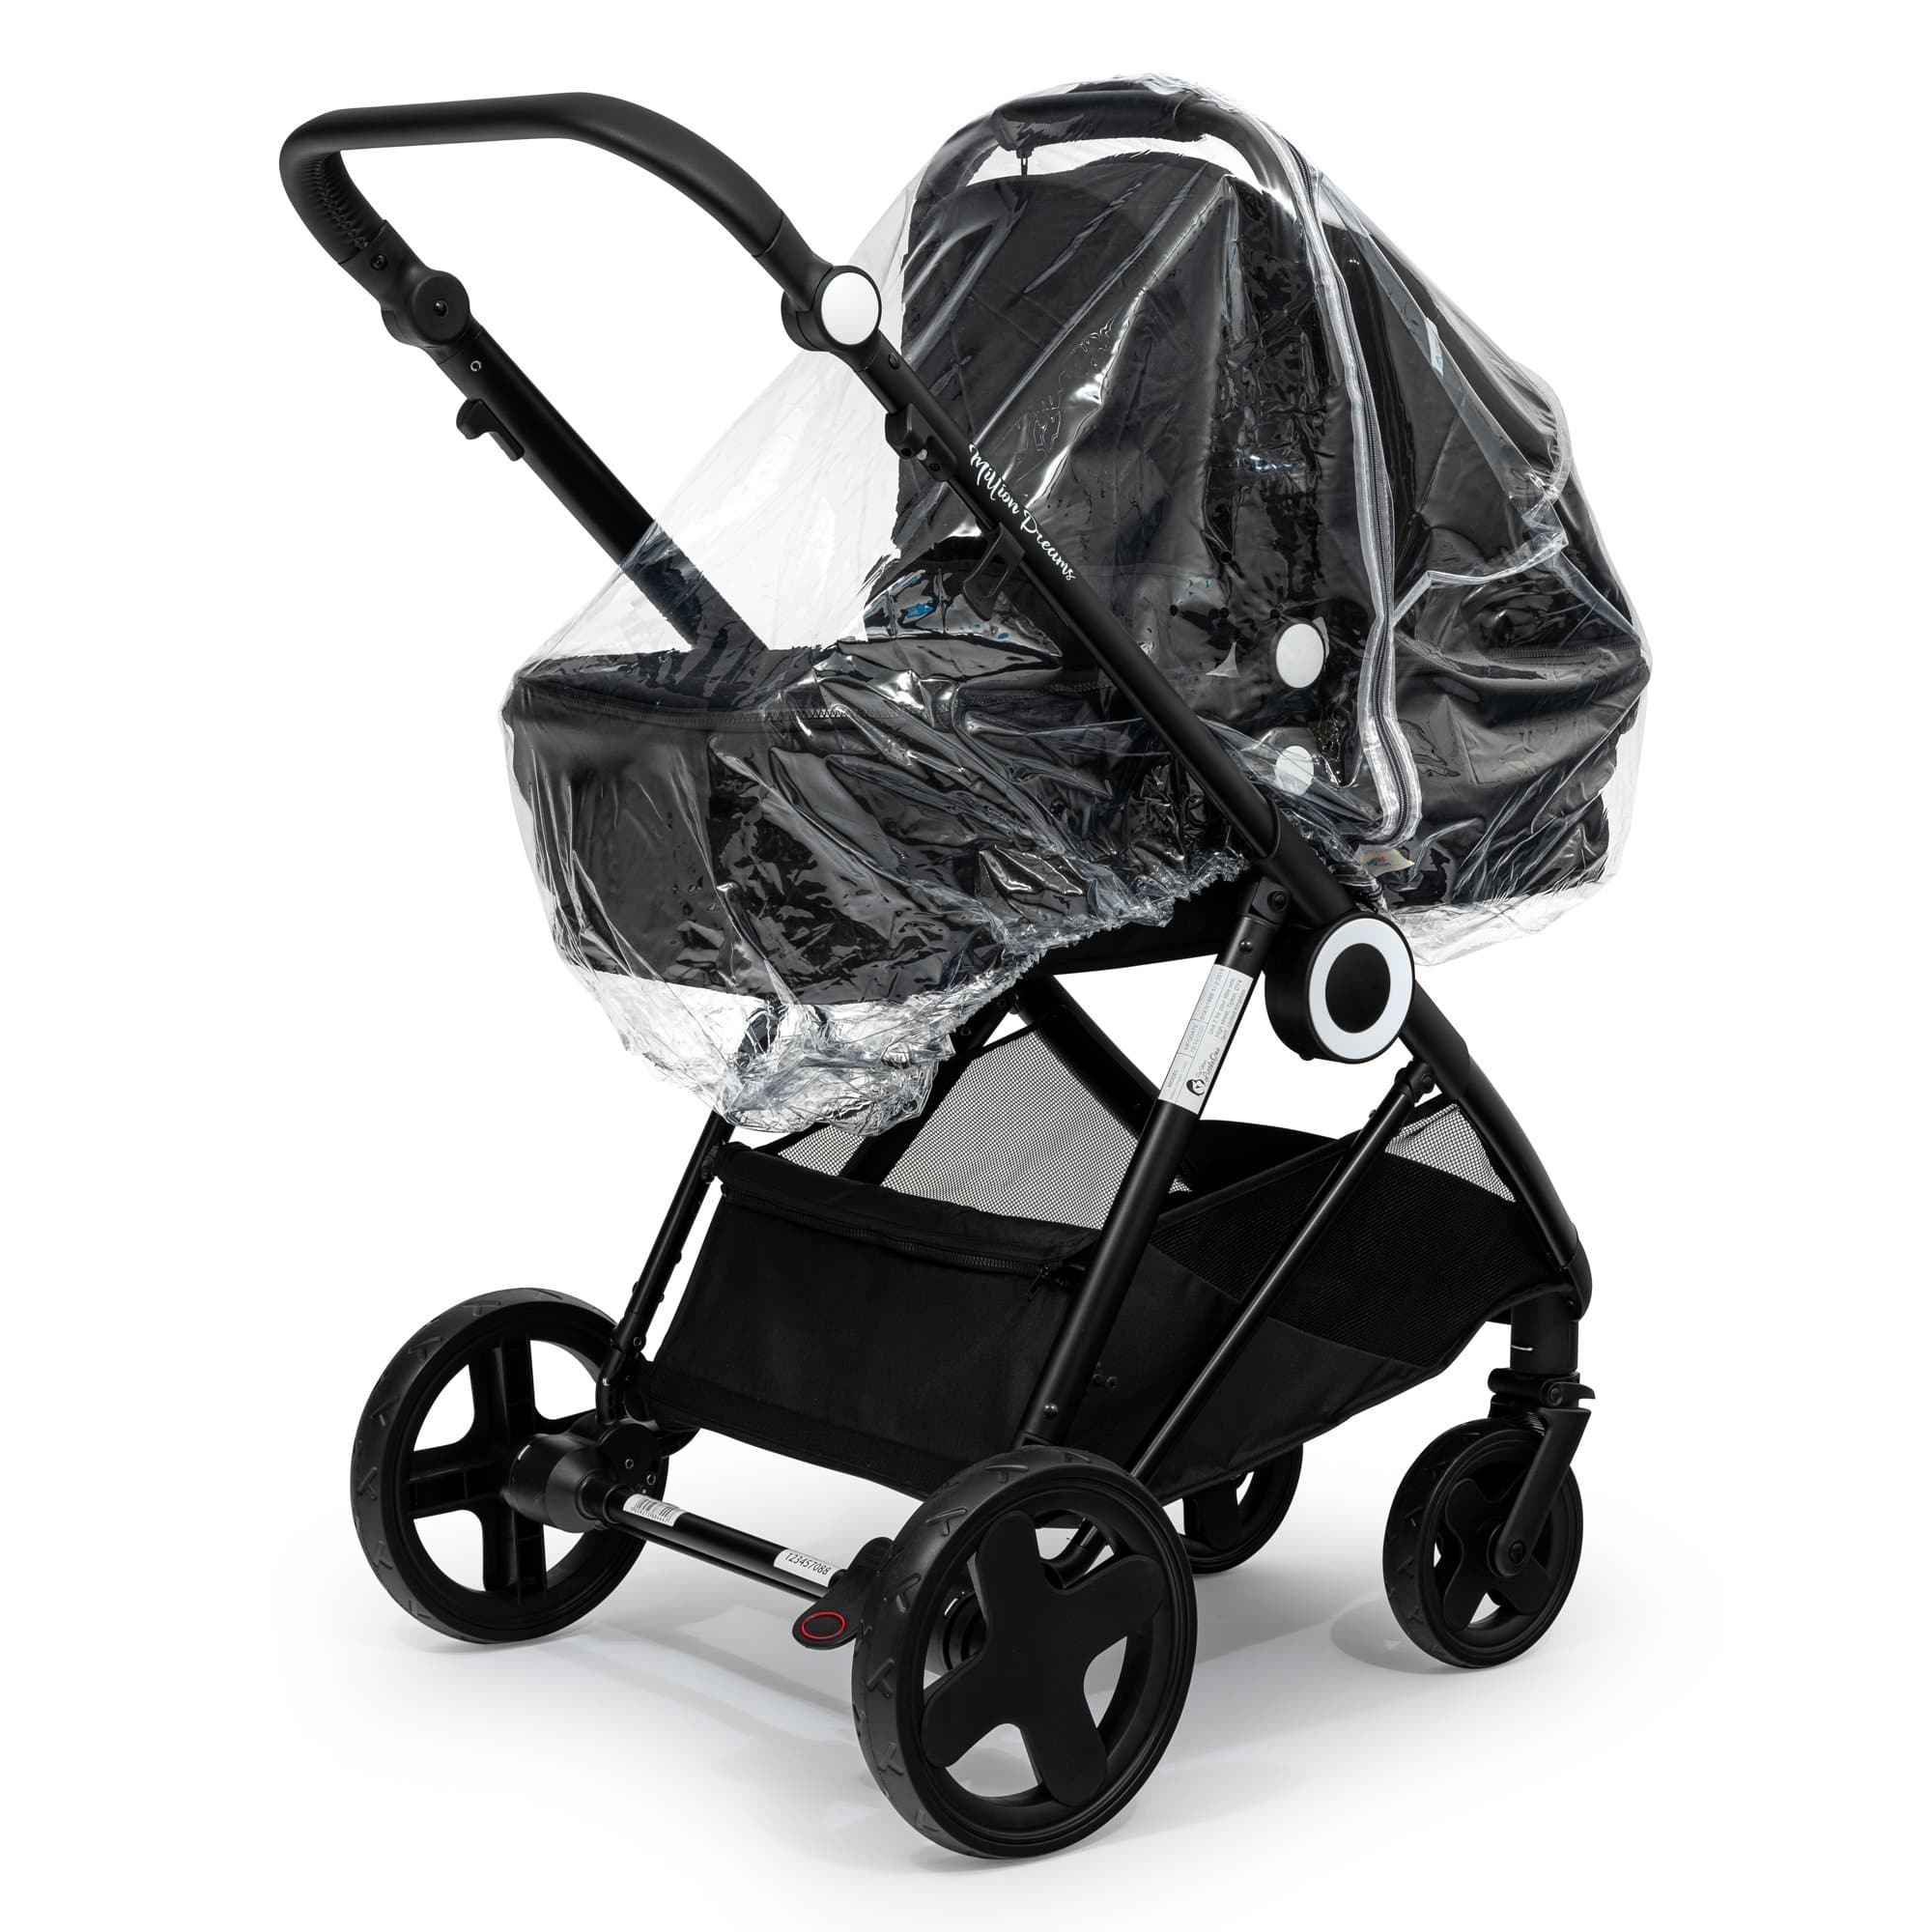 2 in 1 Rain Cover Compatible with BabyCare - Fits All Models - For Your Little One